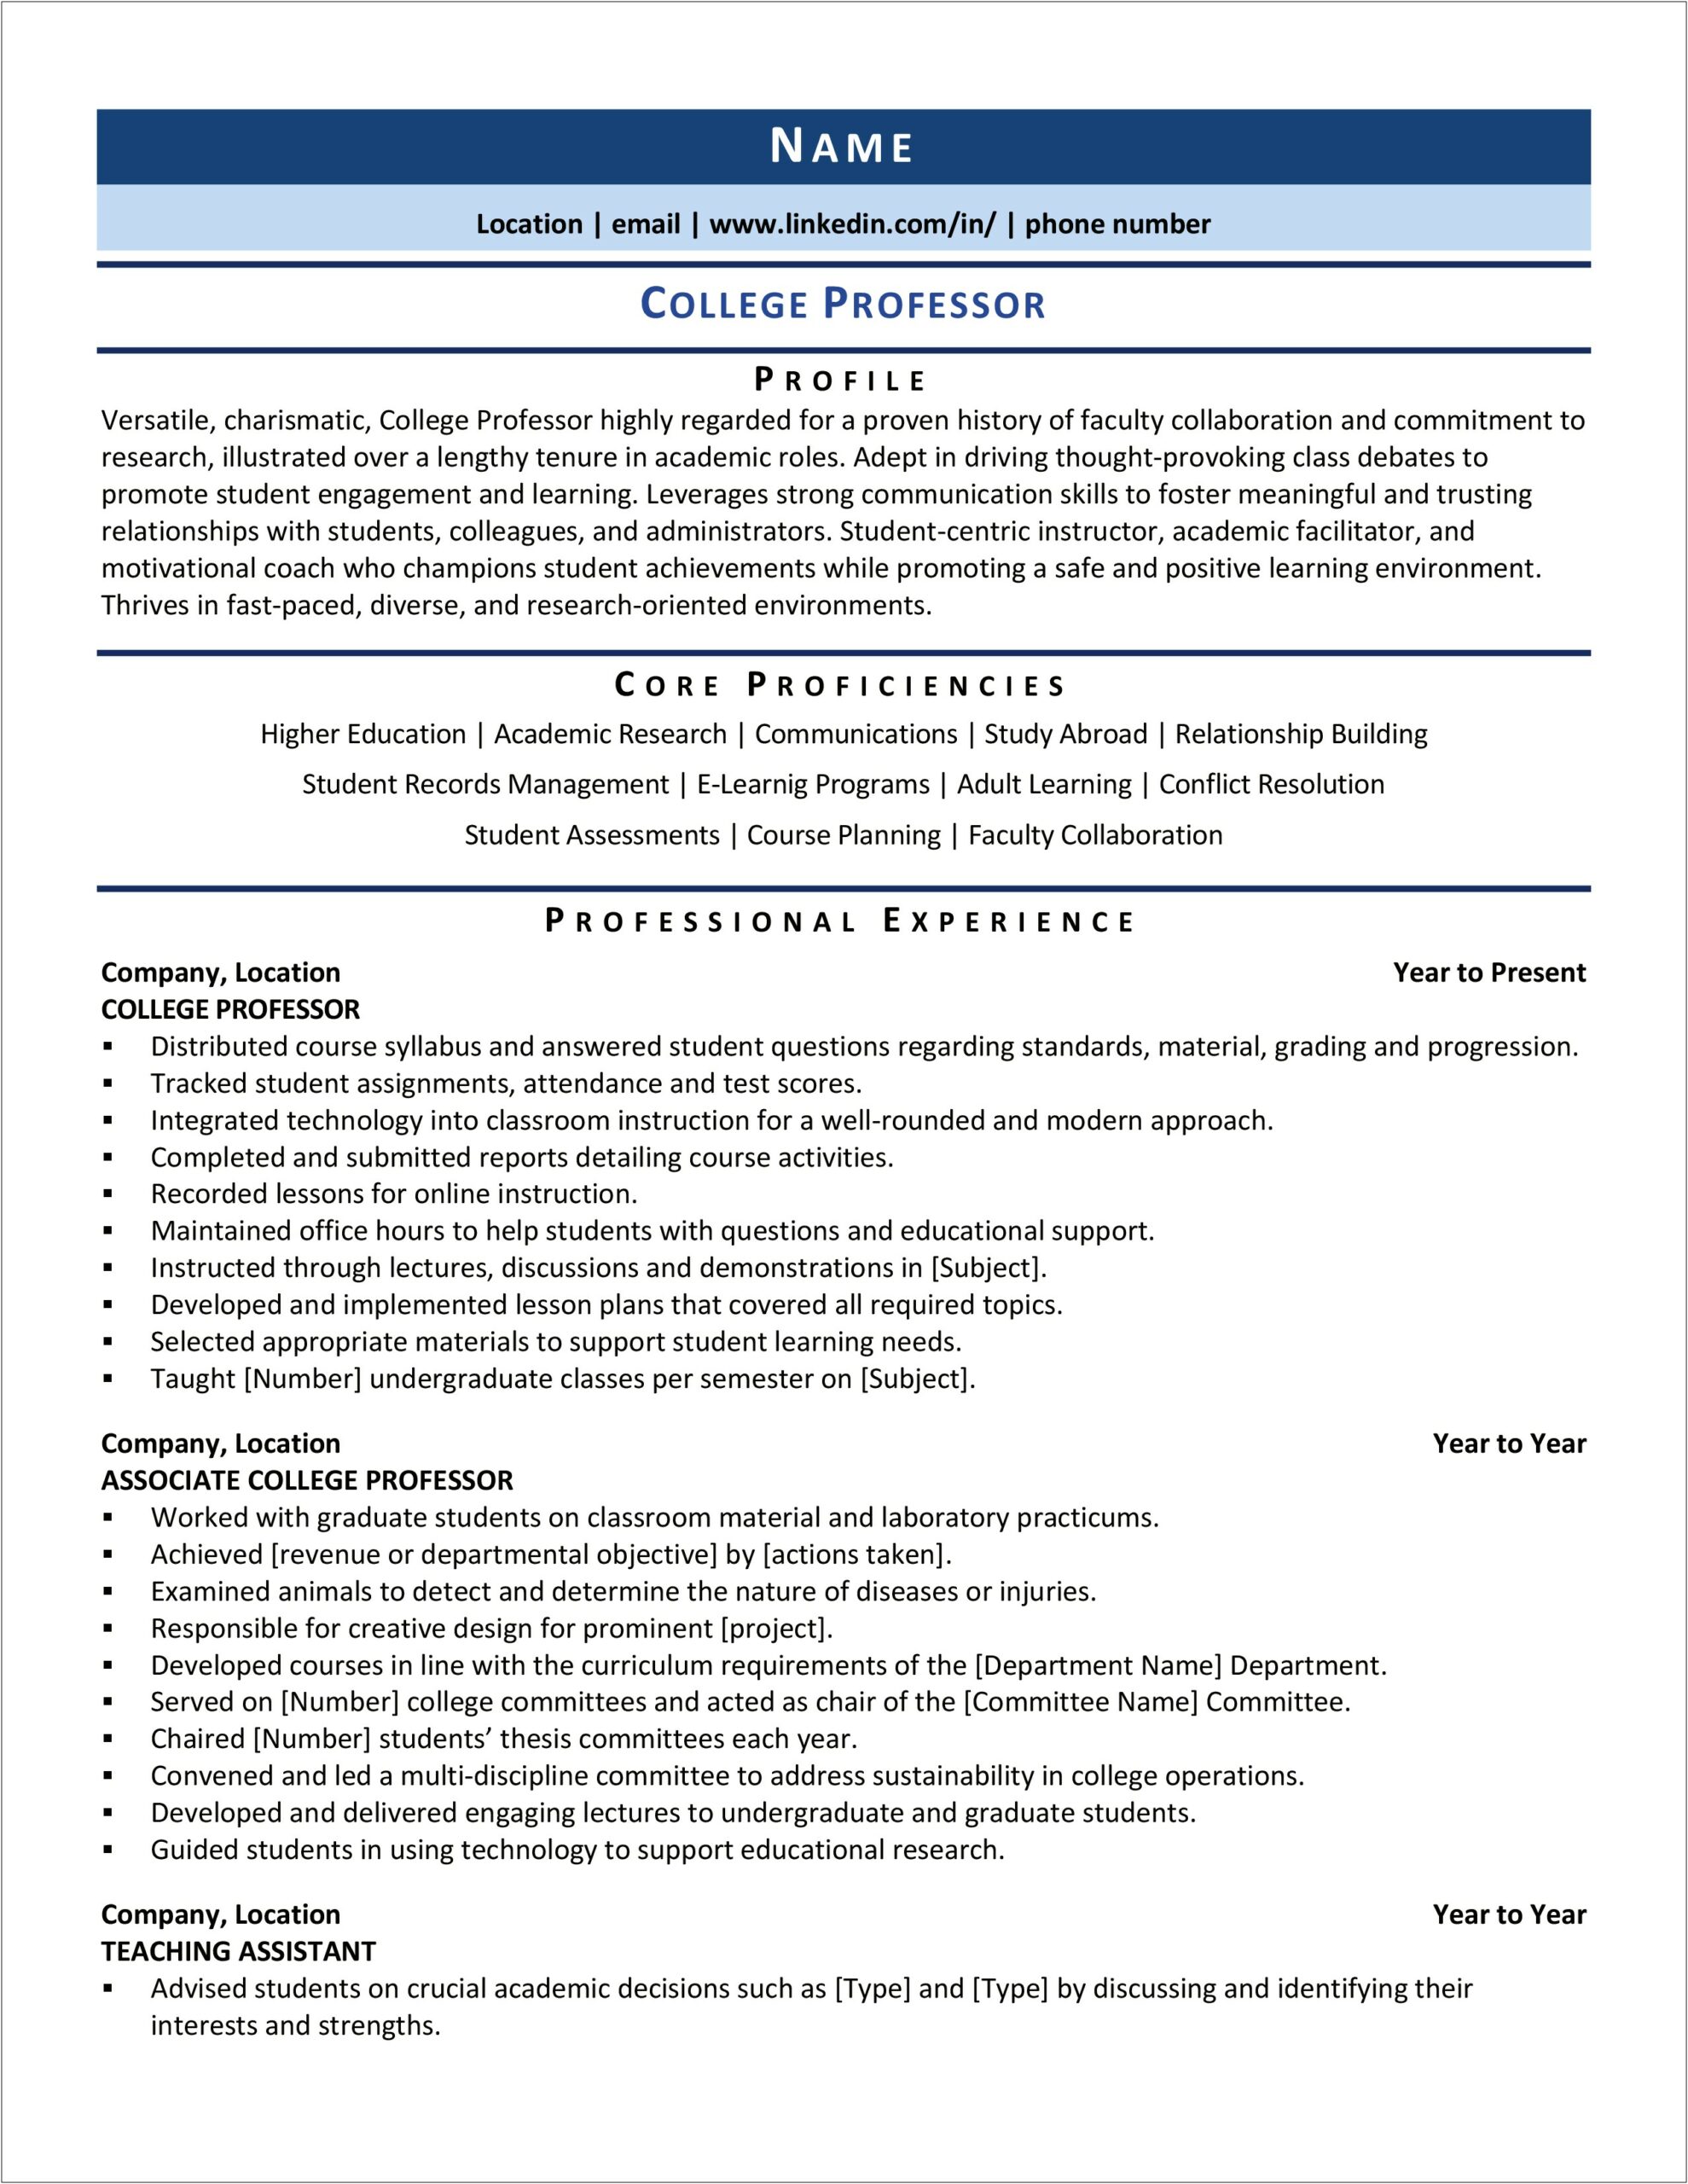 Resume Samples For Teaching College